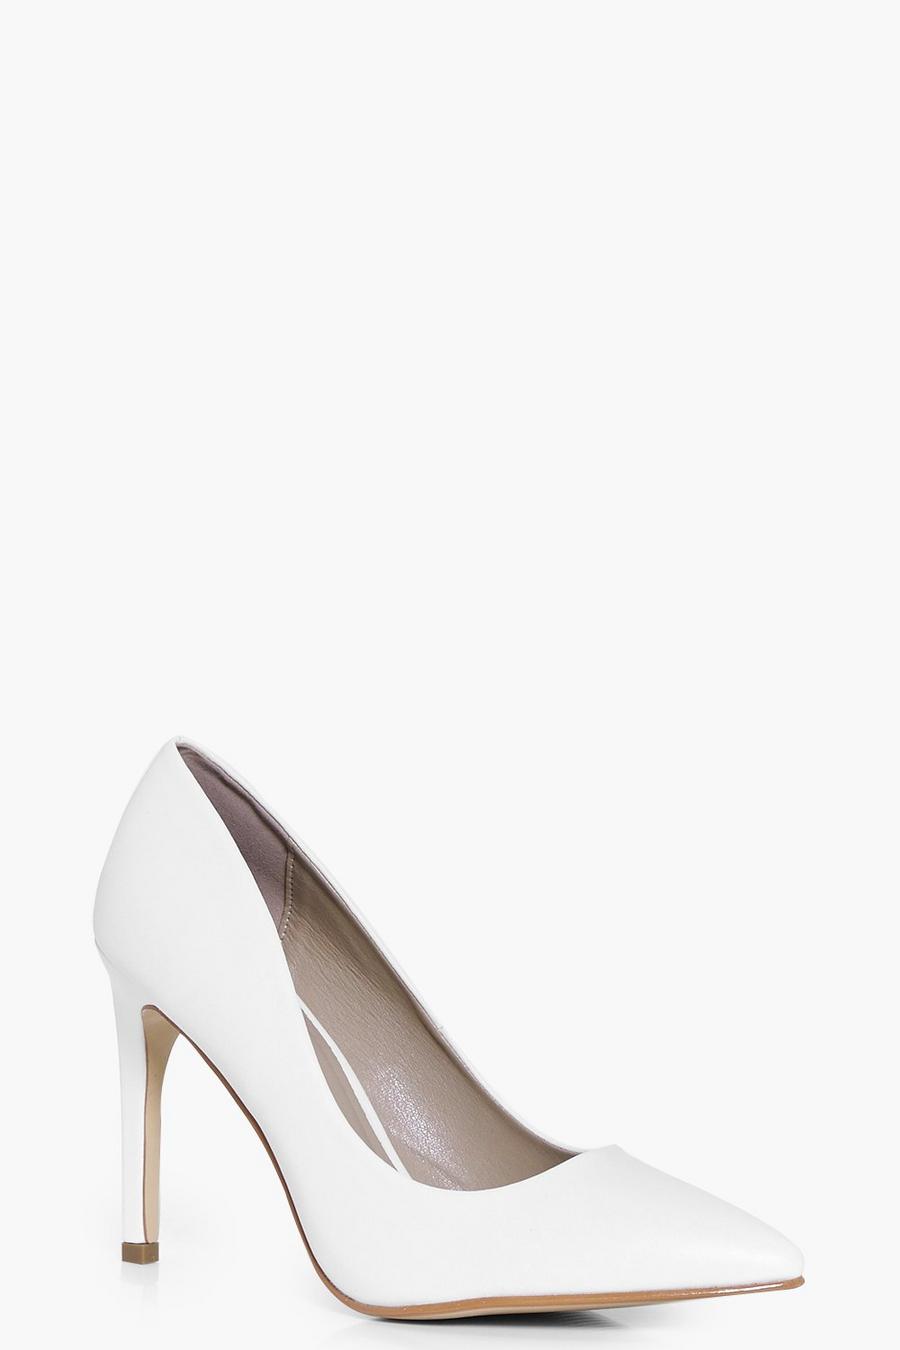 Amie Patent Pointed Court Shoes image number 1